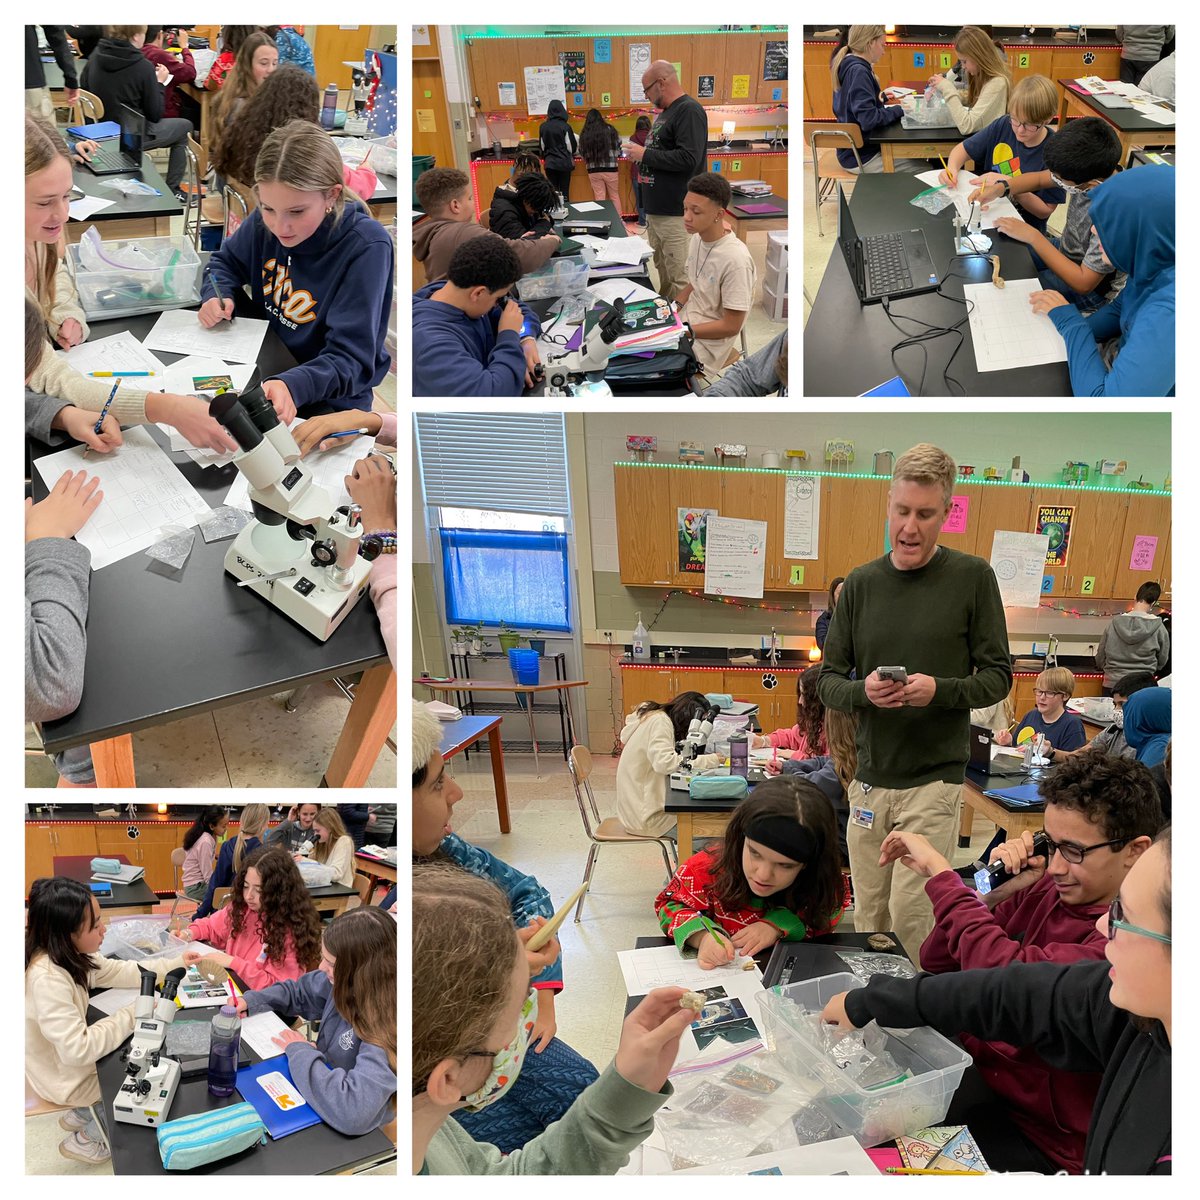 Lots of oohs and ahhs as 8th graders @CockeysvilleMS examined fossils with @joebird1000 and @budinger03 https://t.co/NDTD0PTGpS